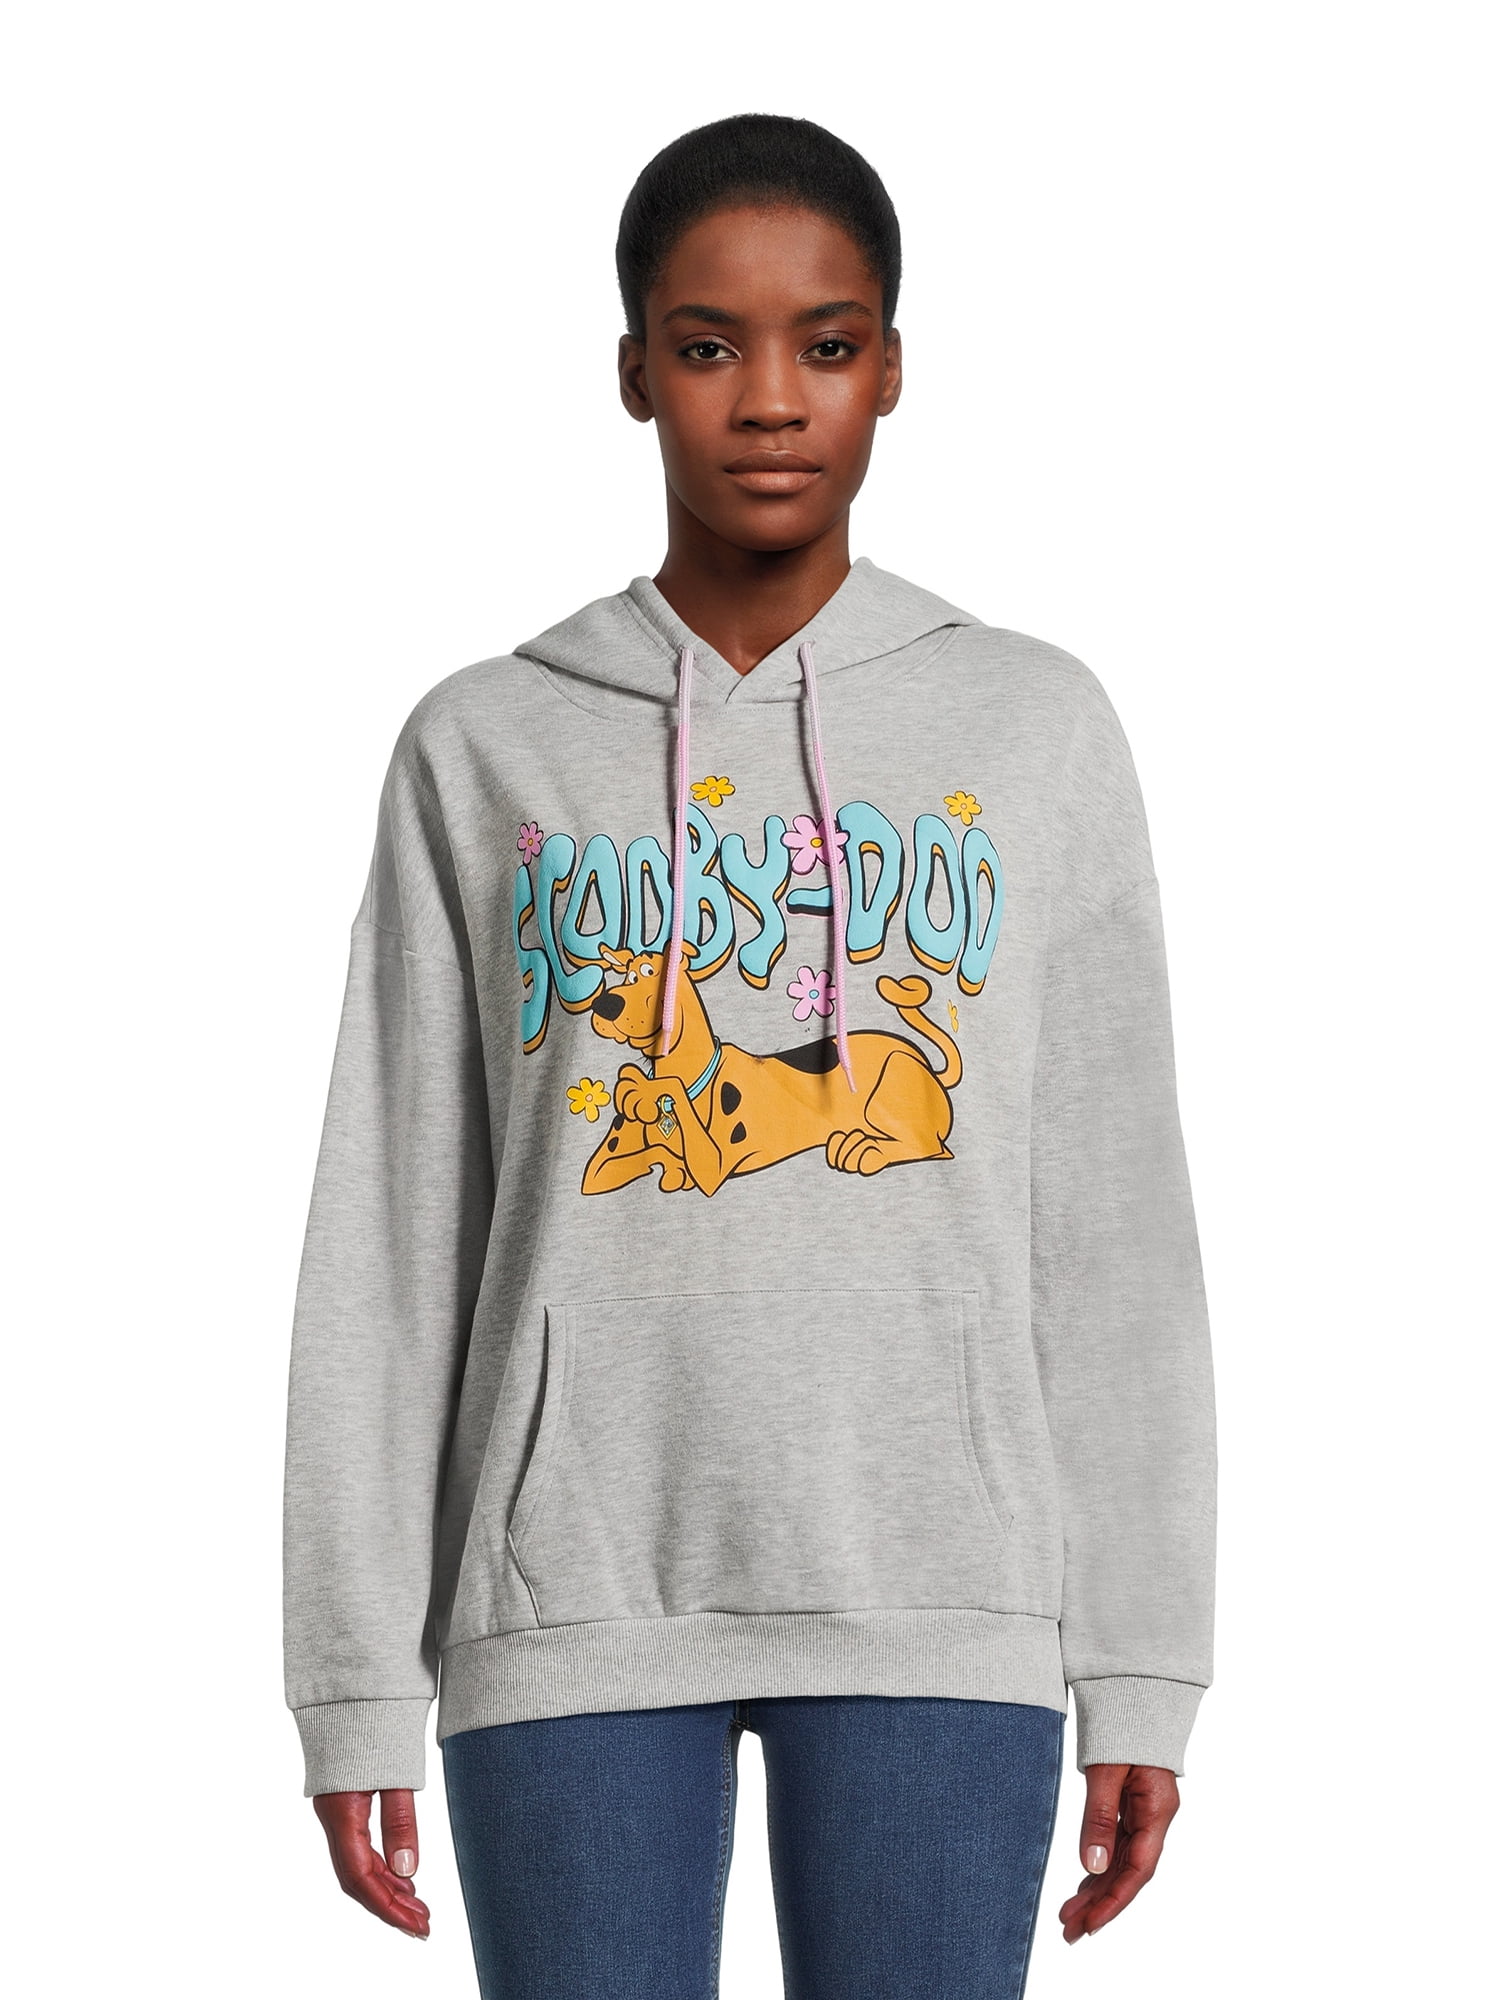 Scooby-Doo Juniors Front and Back Print Hoodie with Long Sleeves, Size XS-3XL